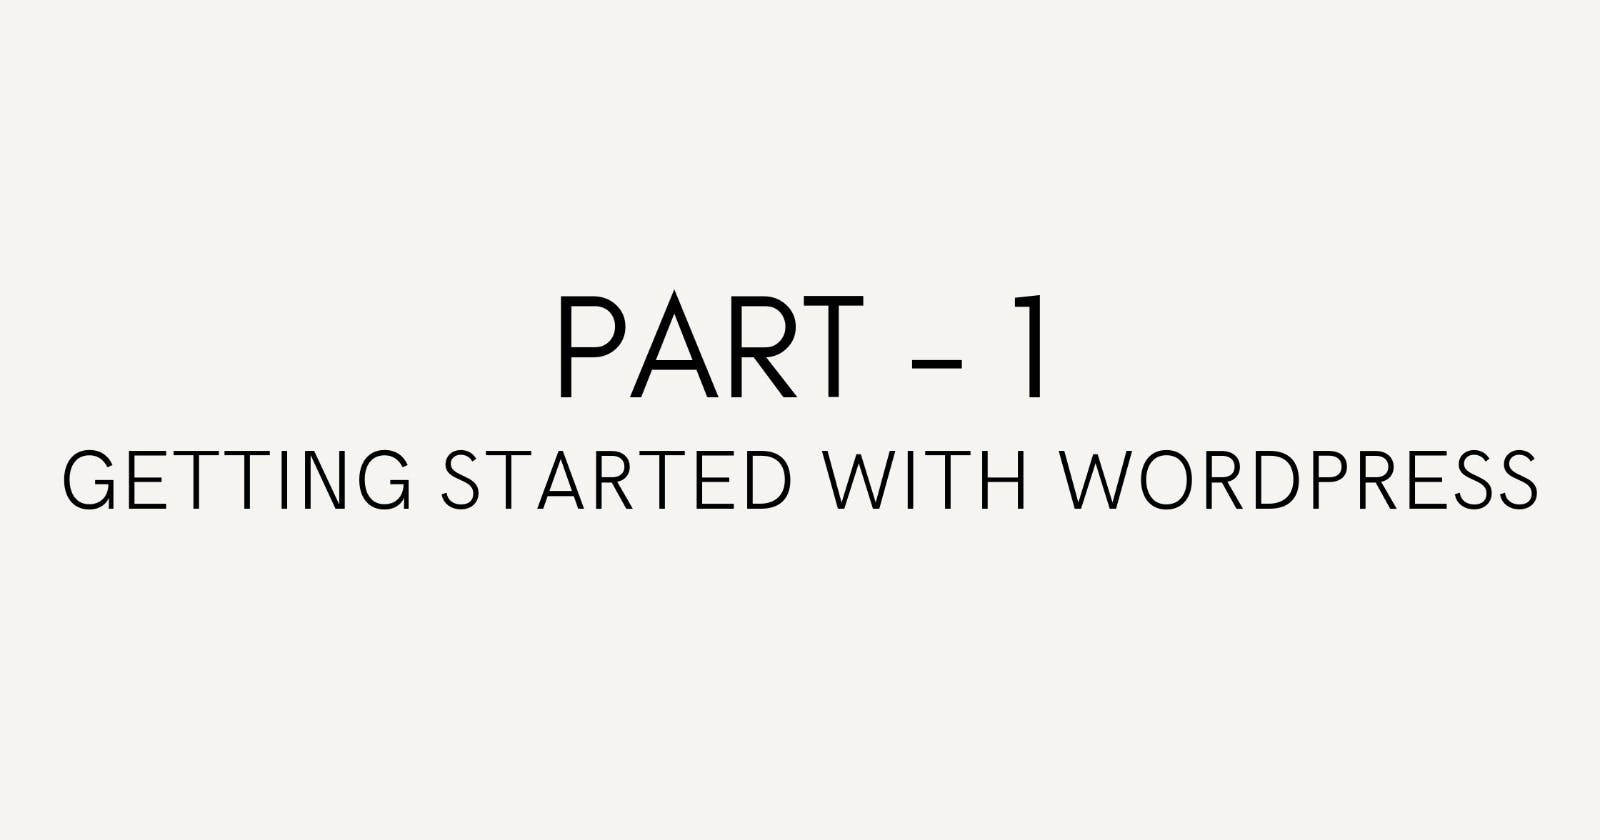 "Getting Started with WordPress: My Journey with rtCamp"